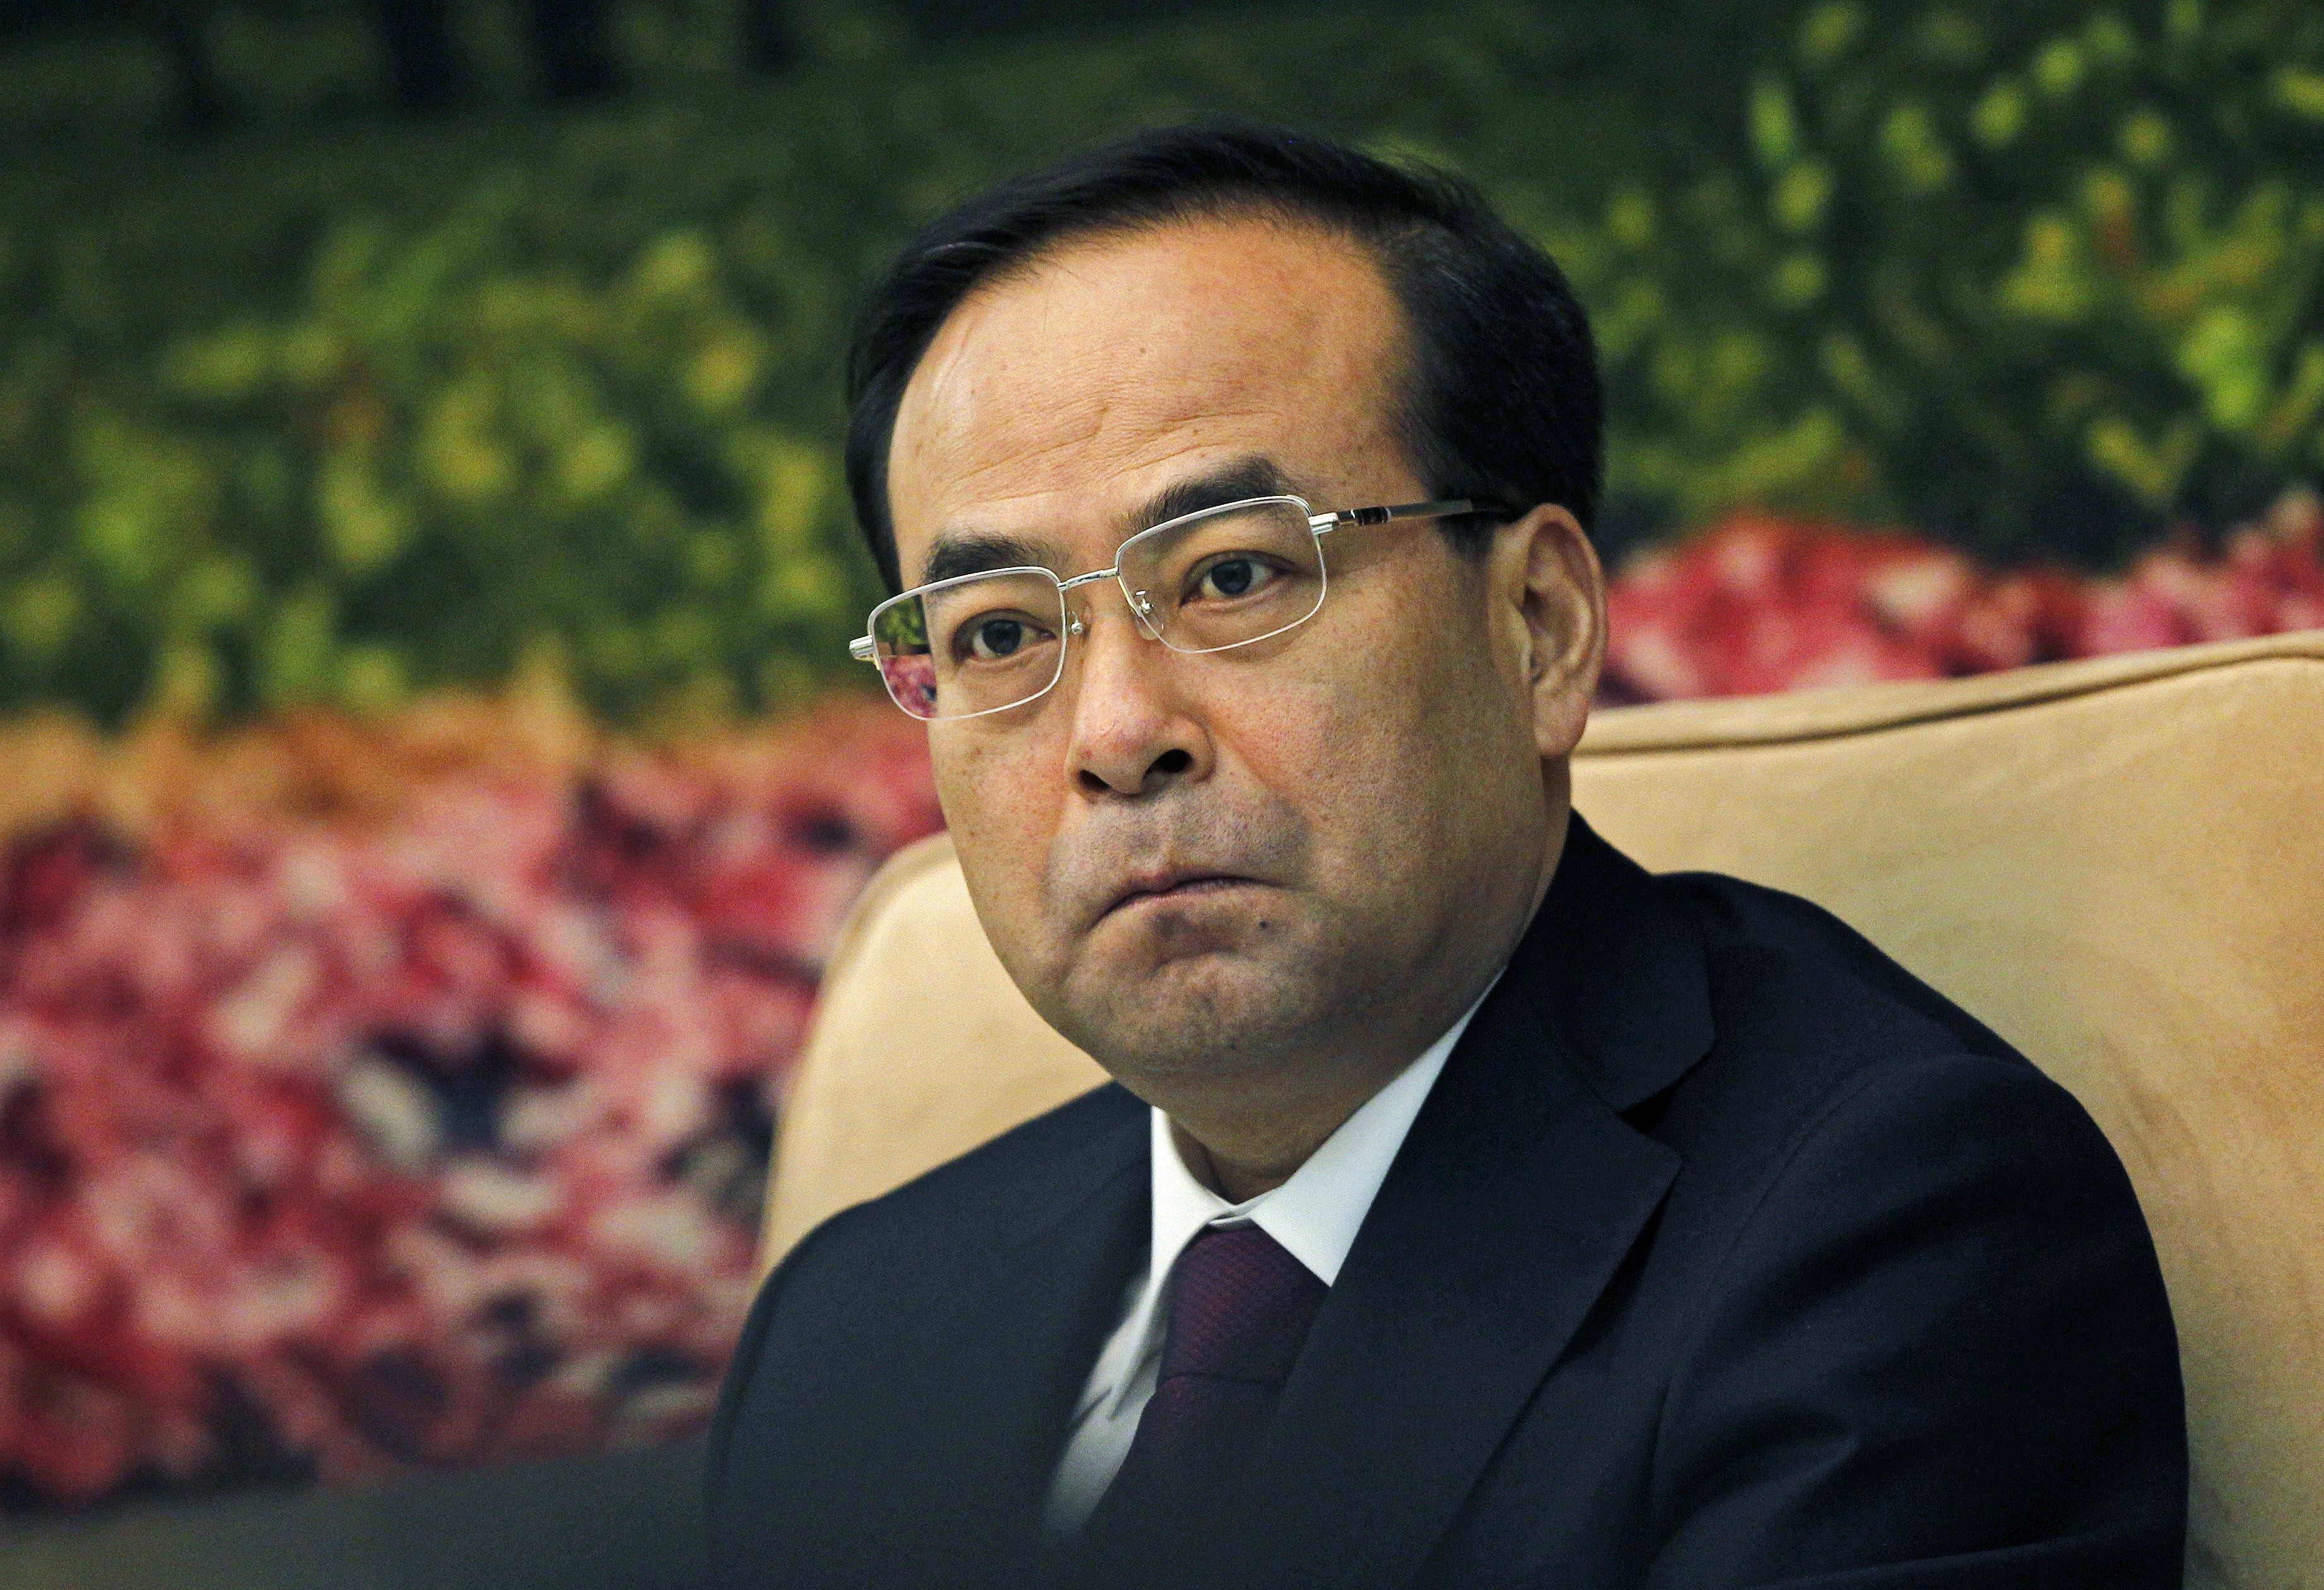 A file picture of Sun Zhengcai taken during a meeting at the Great Hall of the People in Beijing five years ago. Photo: EPA